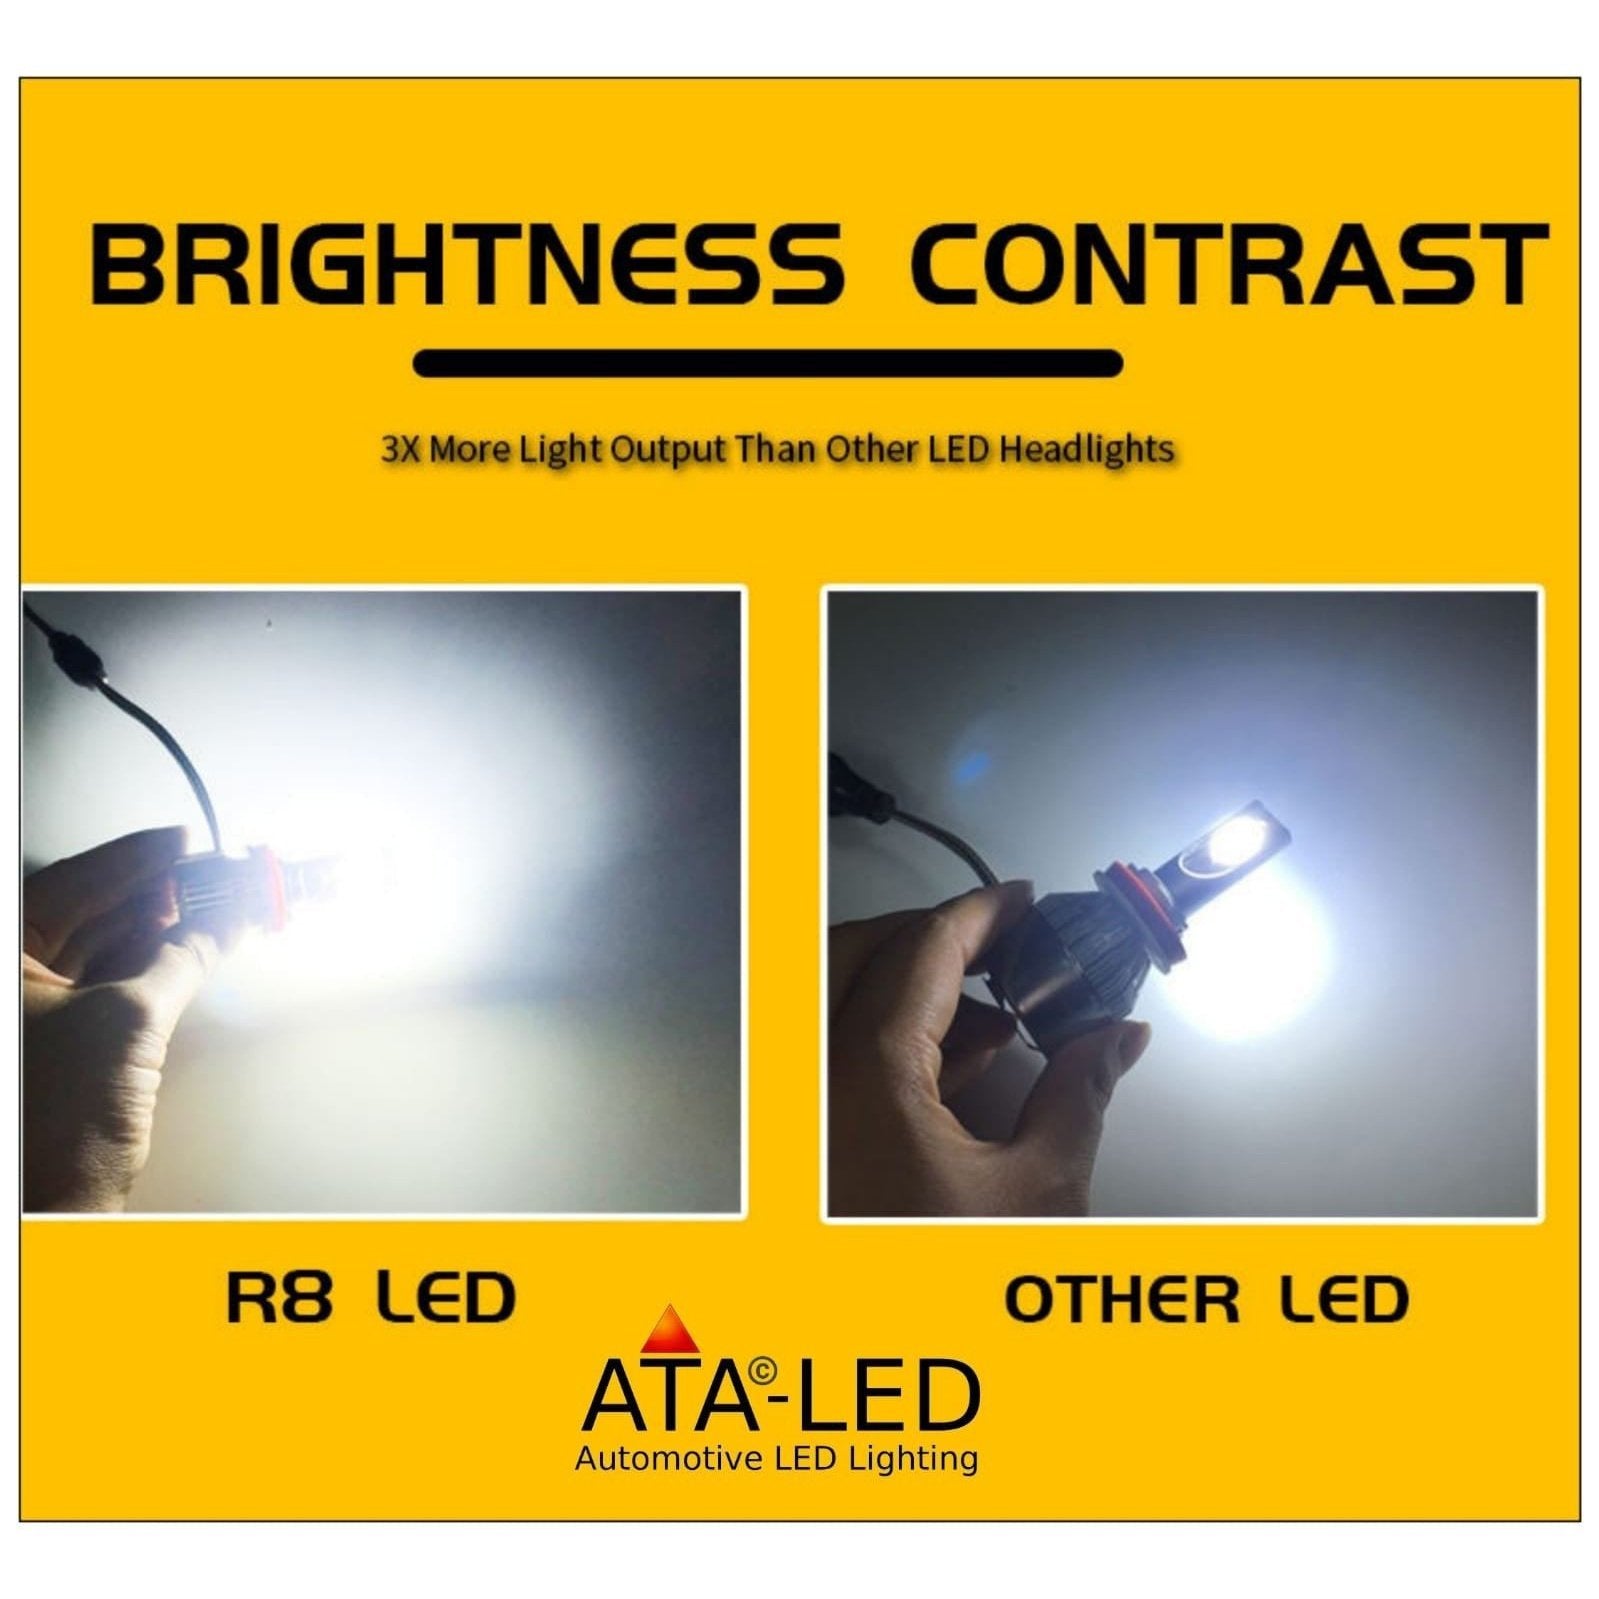 H11 H8 H9 R8 Brightness contrast 3X More light output than other led headlights R8 VS other LED